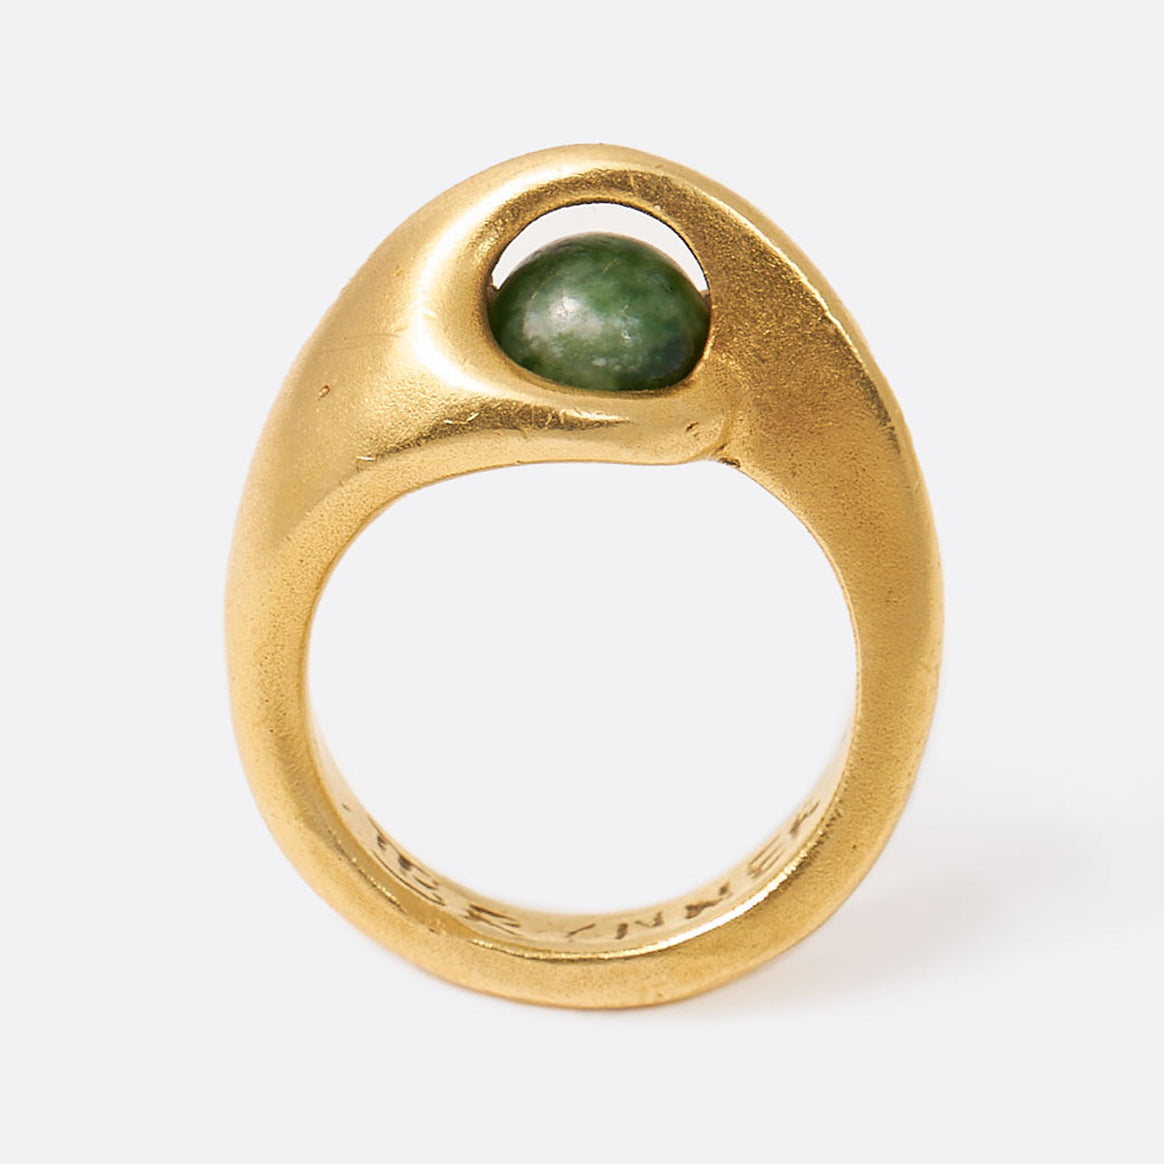 Yellow gold ring with floating green sodalite sphere, shown from the side.